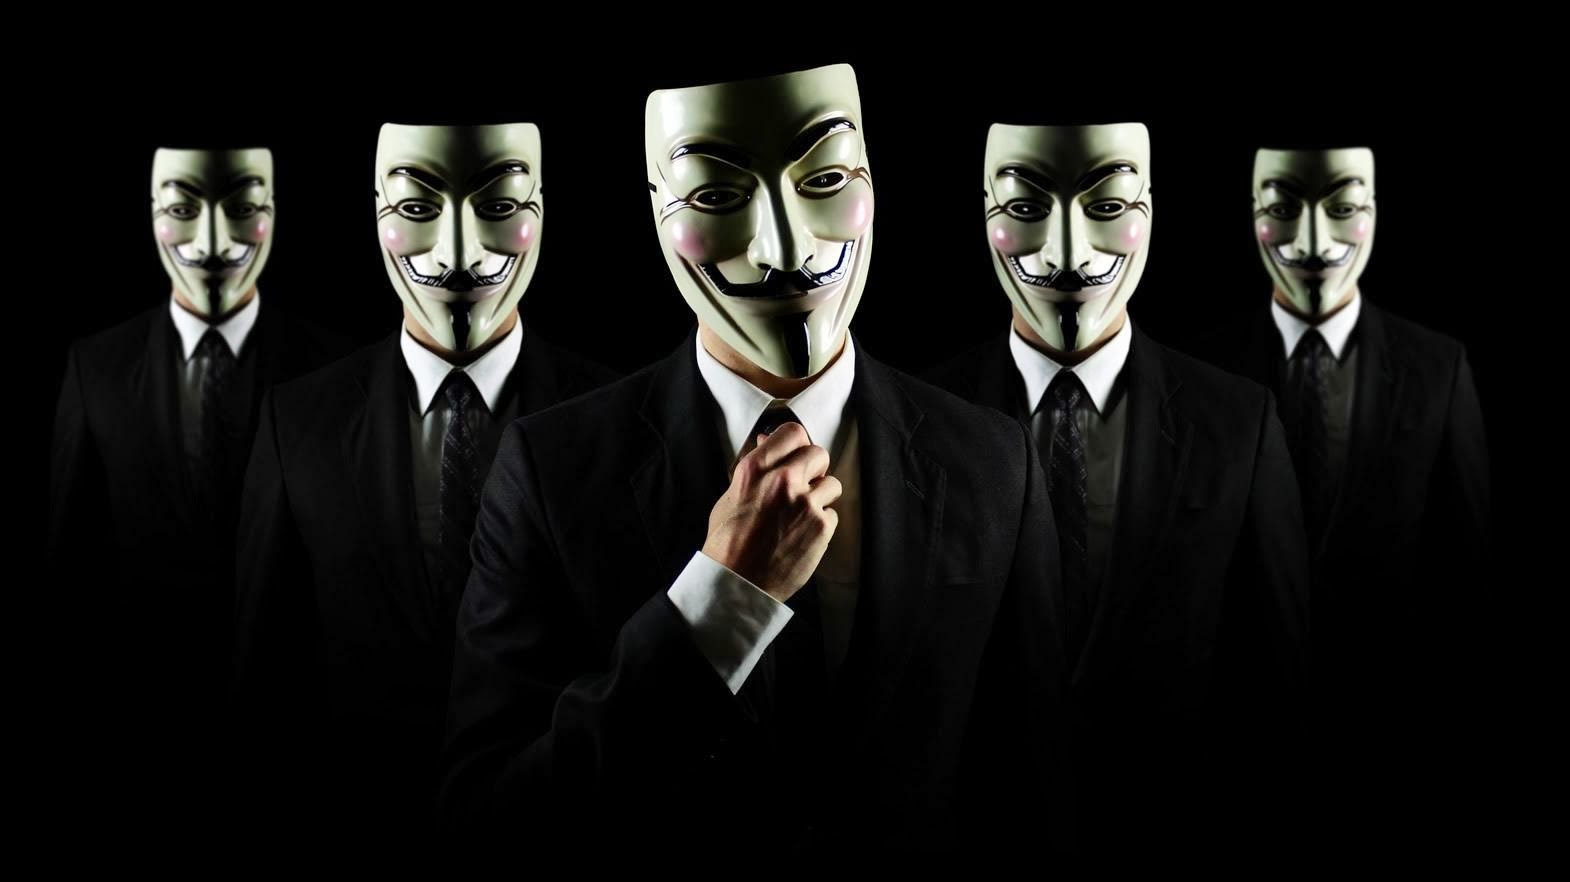 CYBERSHARE ASAL USUL TOPENG PARA HACKER ANONYMOUS